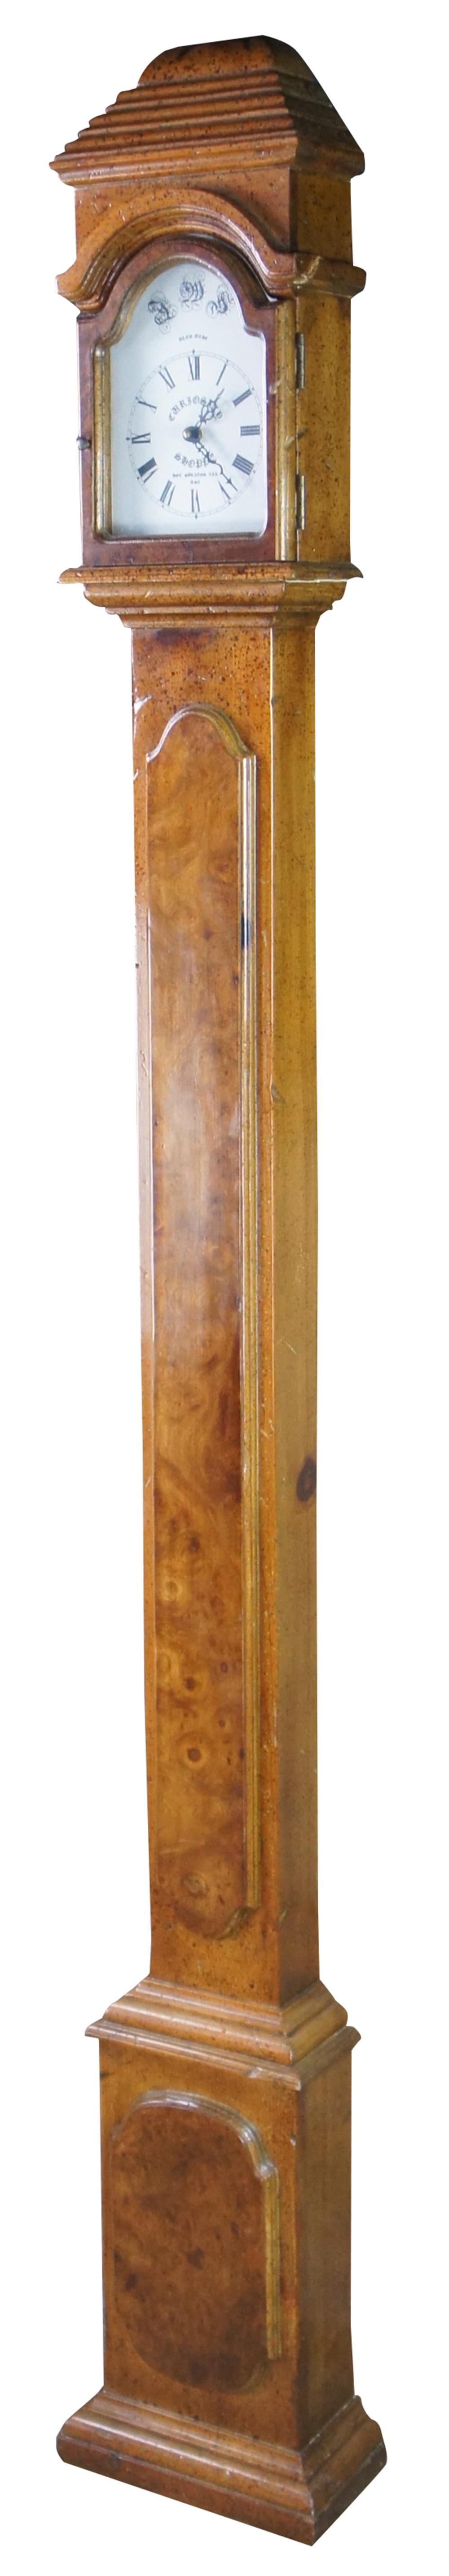 Vintage hand made tall case Grandmother clock from the Curiosity Shoppe of Hot Springs Arkansas. Made from distressed pine with walnut burl paneling. Features a slim, quartz movement and roman numeral face. Measure: 81